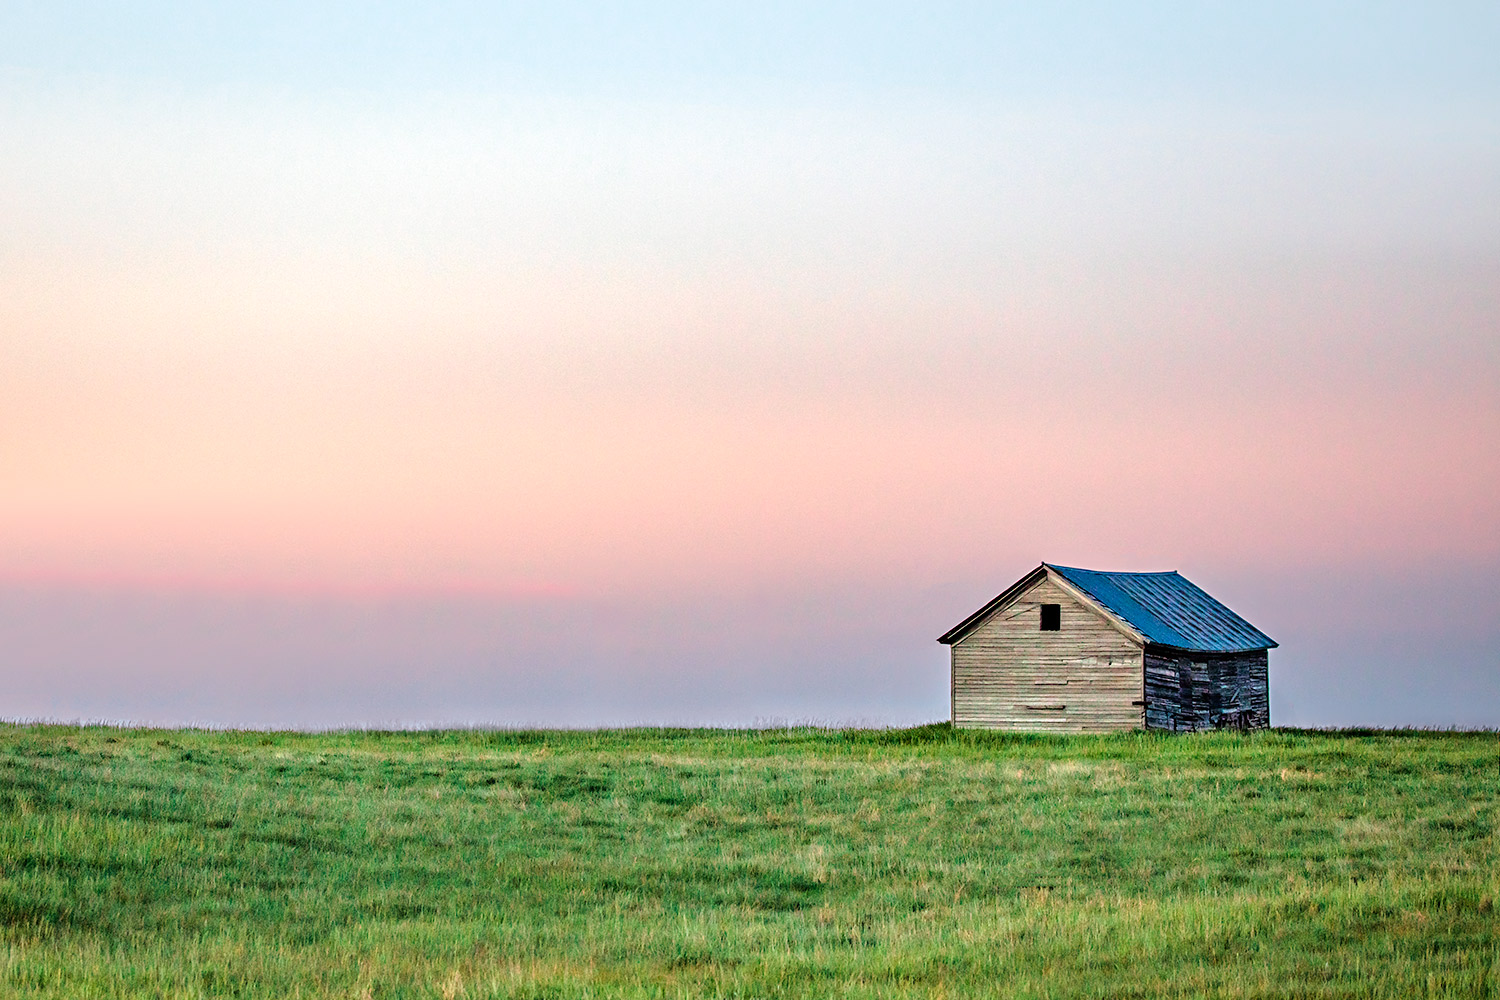 A lonely old shed stands watch over the eastern Montana plains near Baker, Montana.&nbsp;→ Buy a Print&nbsp;or License Photo